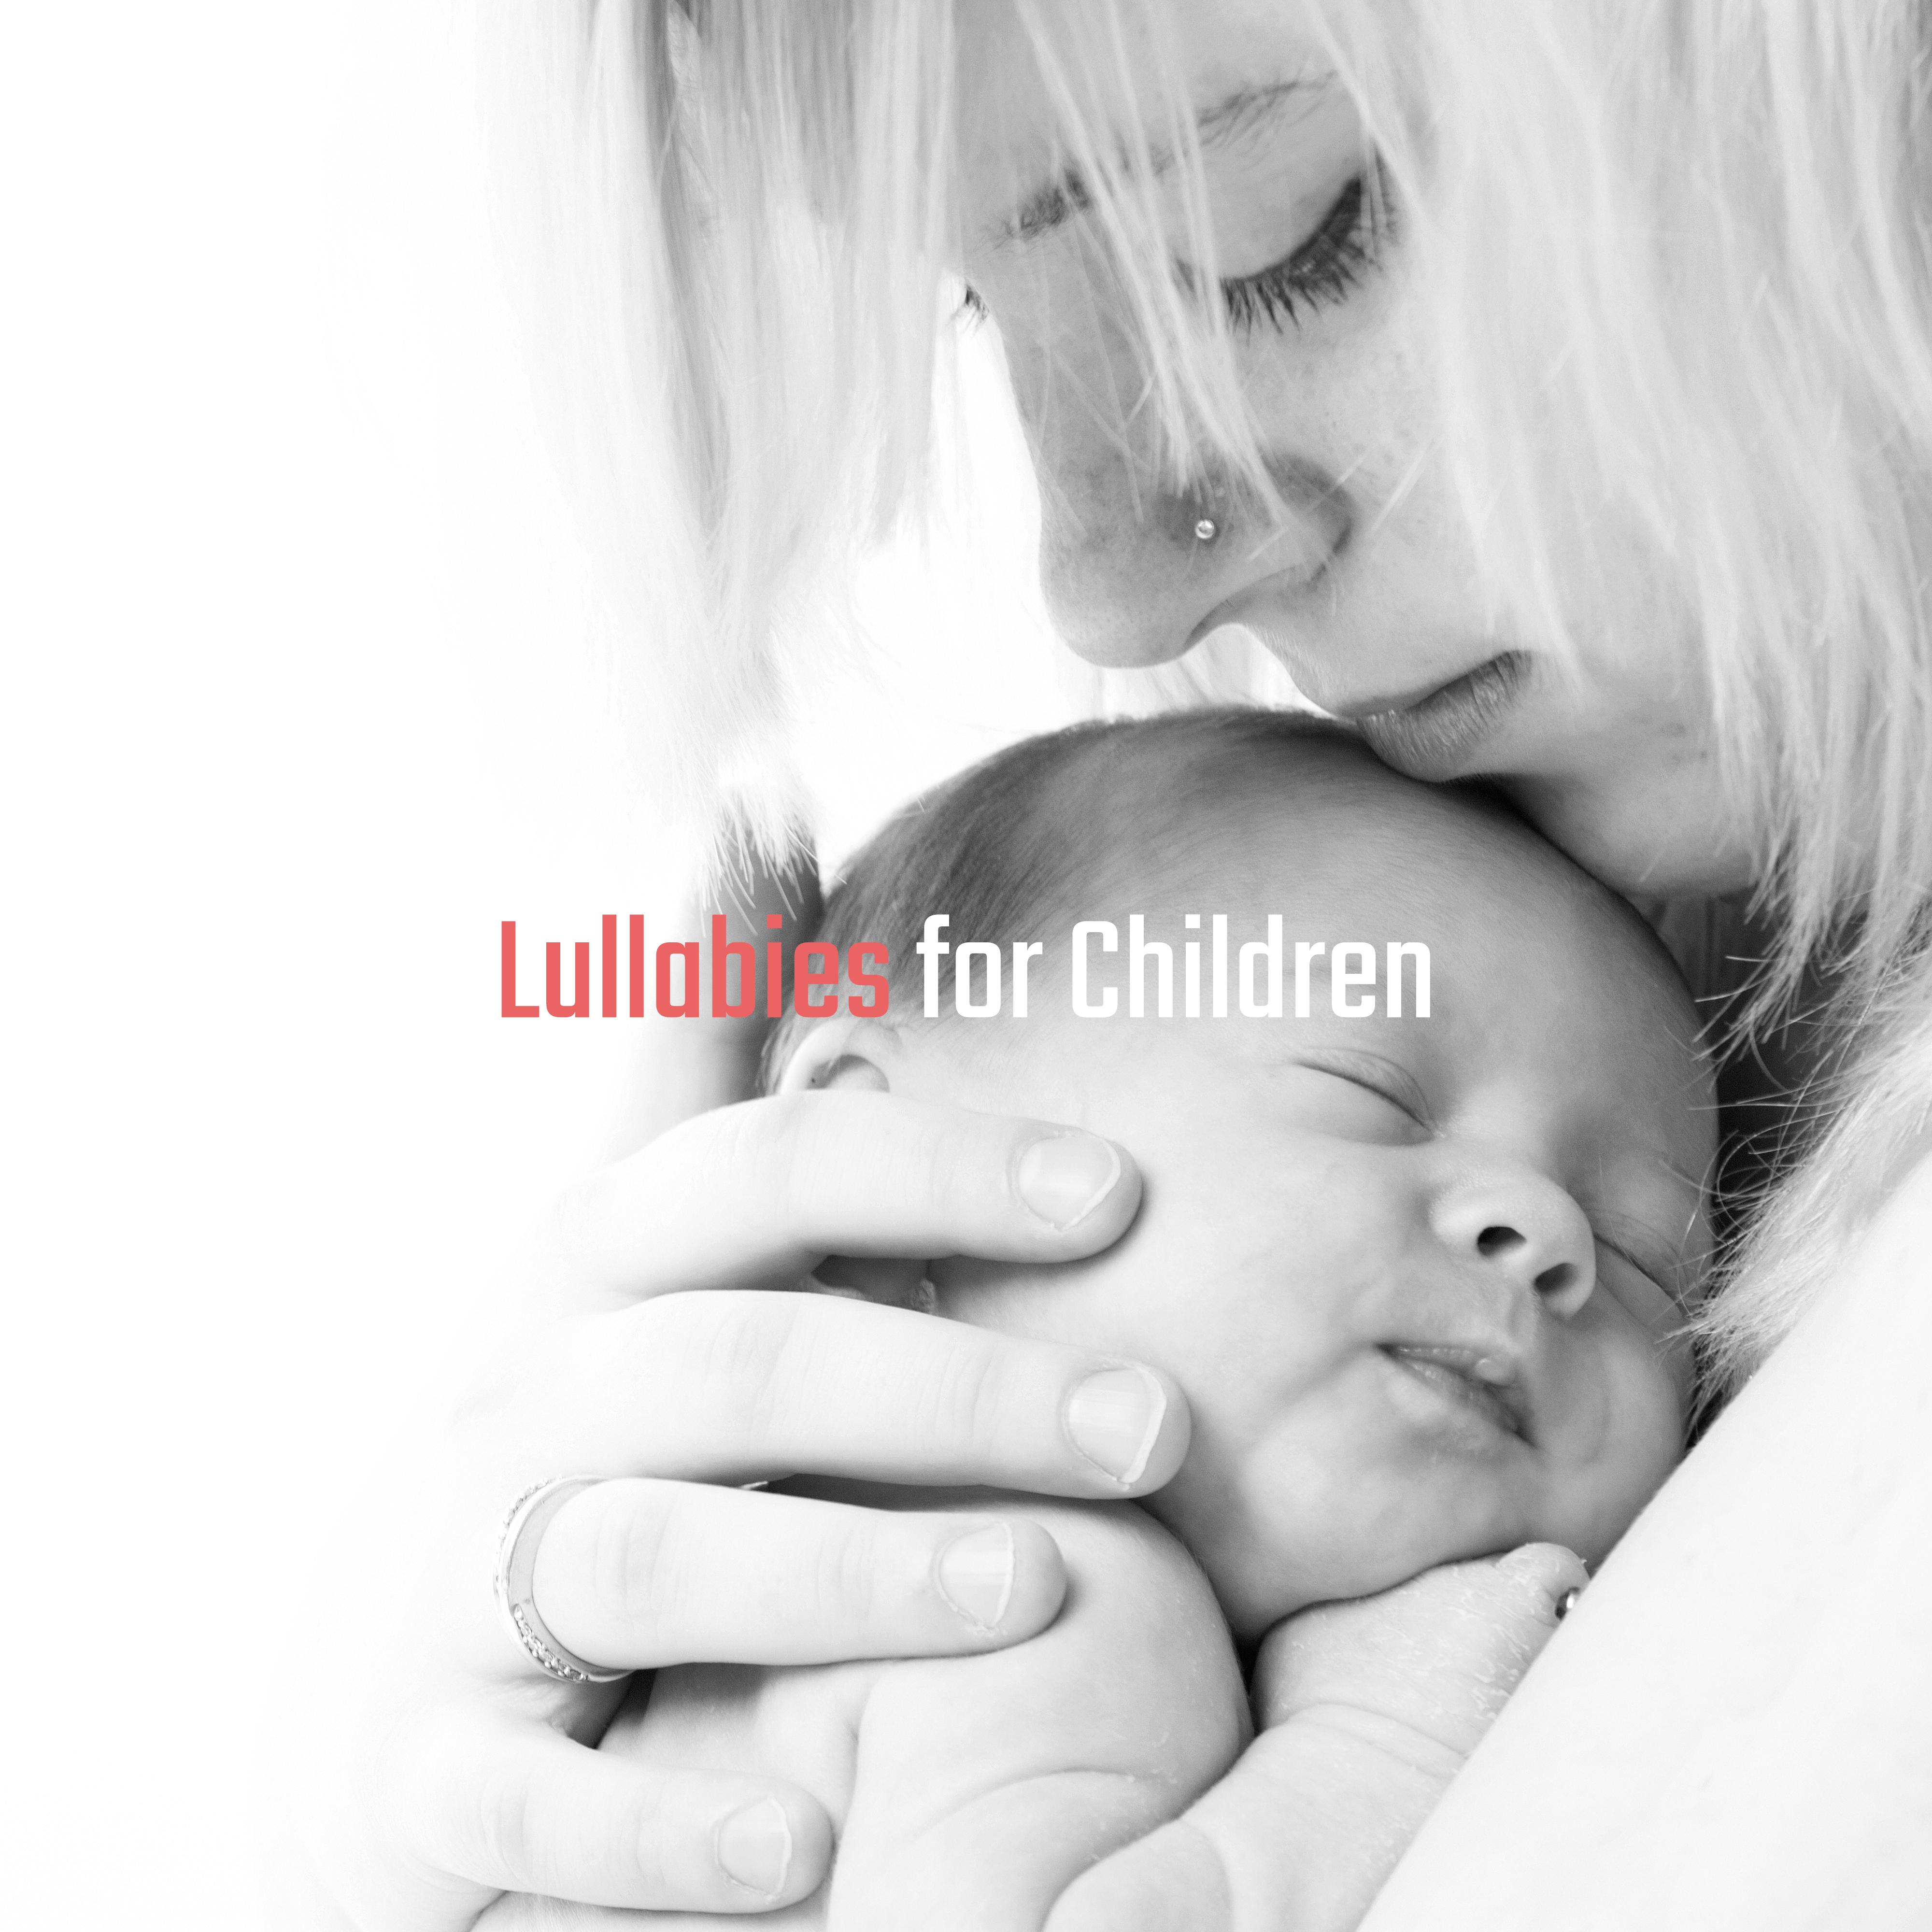 Lullabies for Children – New Age Music for Relaxation, Bedtime Baby, Relaxing Lullabies, Calm Sleep, Baby Music